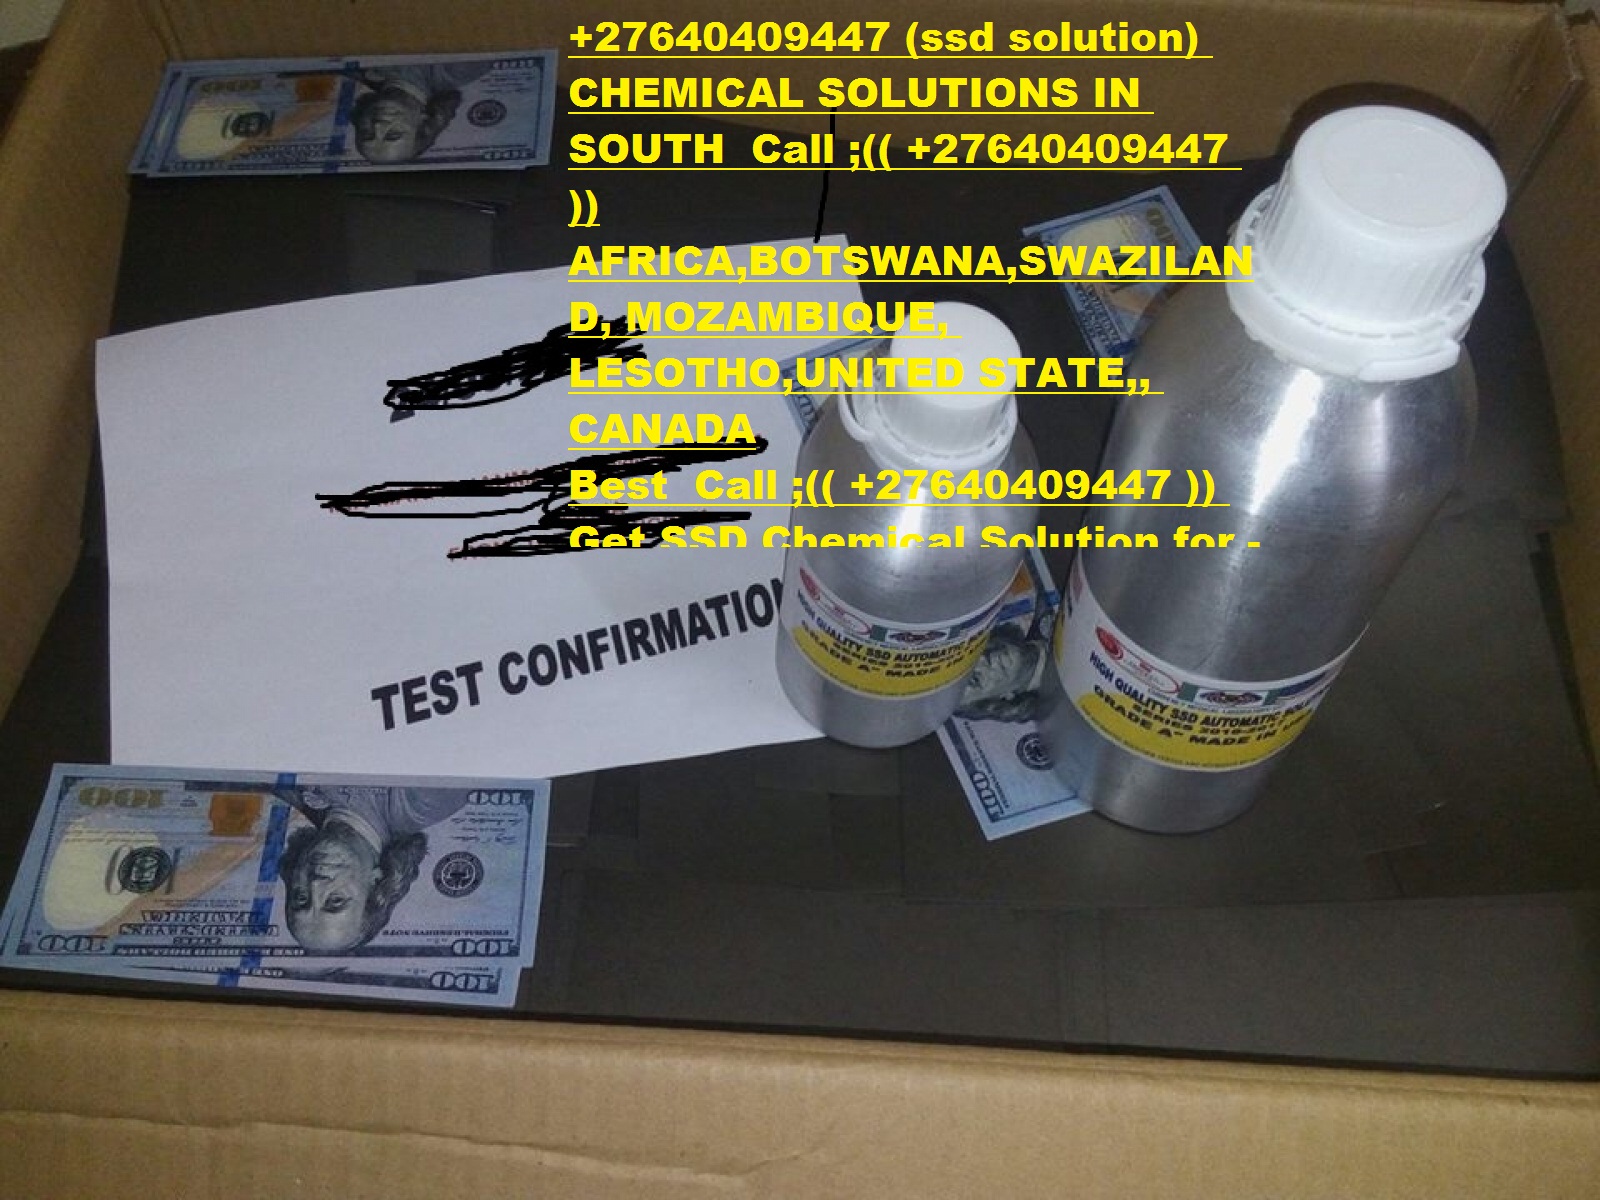 +27640409447 SSD CHEMICAL SOLUTION FOR SALE IN USA GERMANY CANADA UK UAE SUDAN  2000